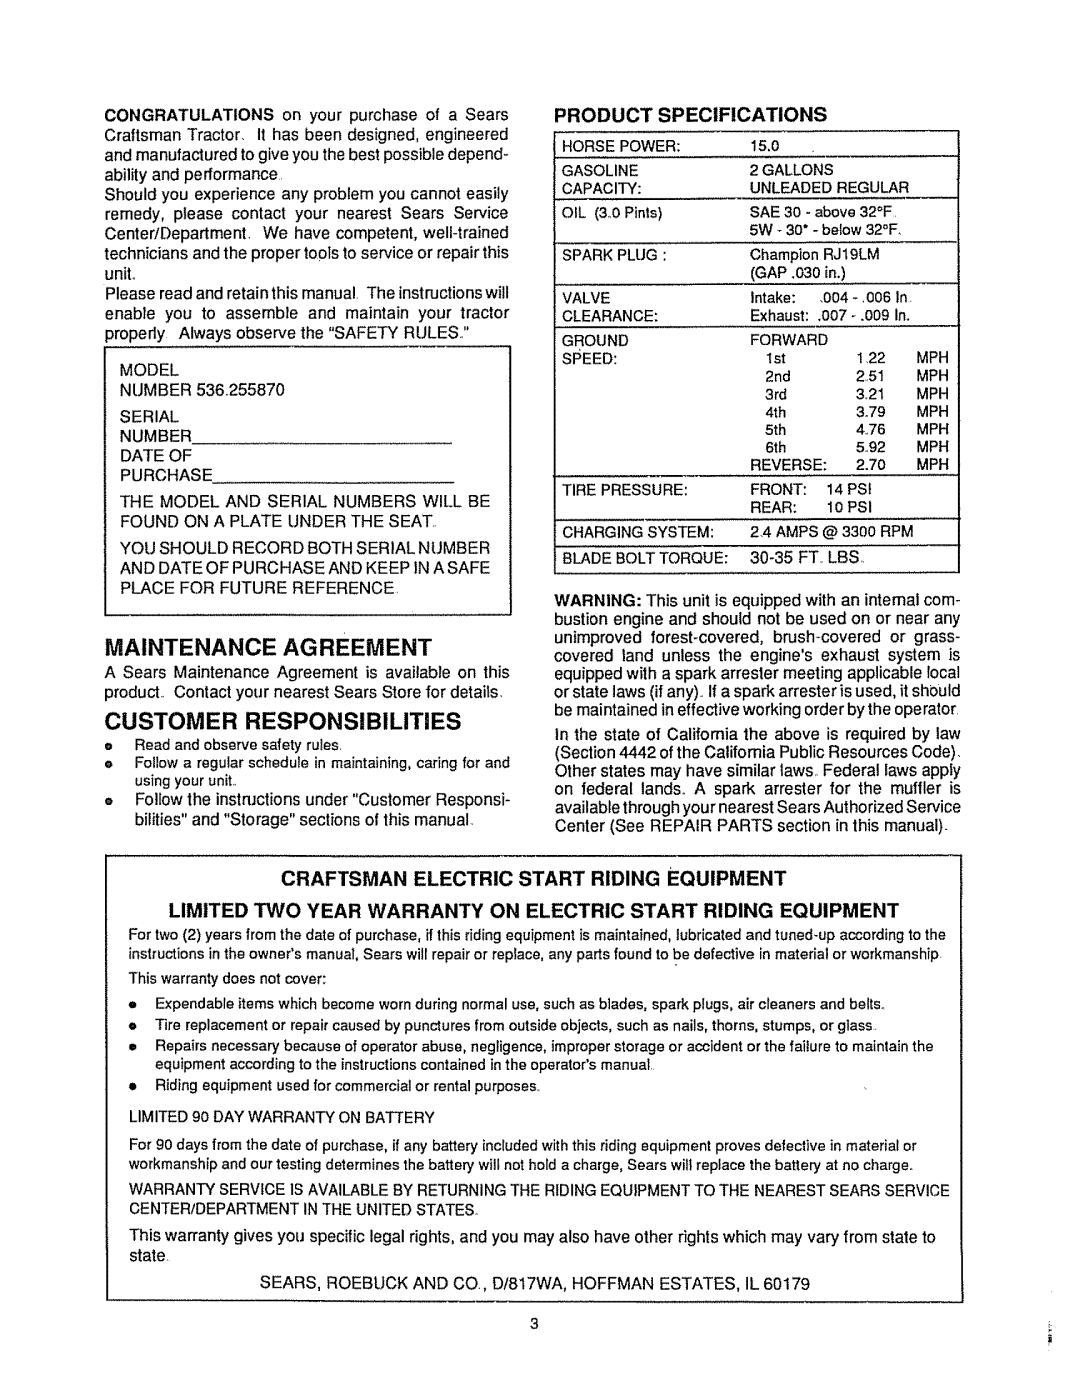 Sears 536.25587 owner manual Serial Number Dateof Purchase, Maintenance Agreement, Customer Responsibilities 